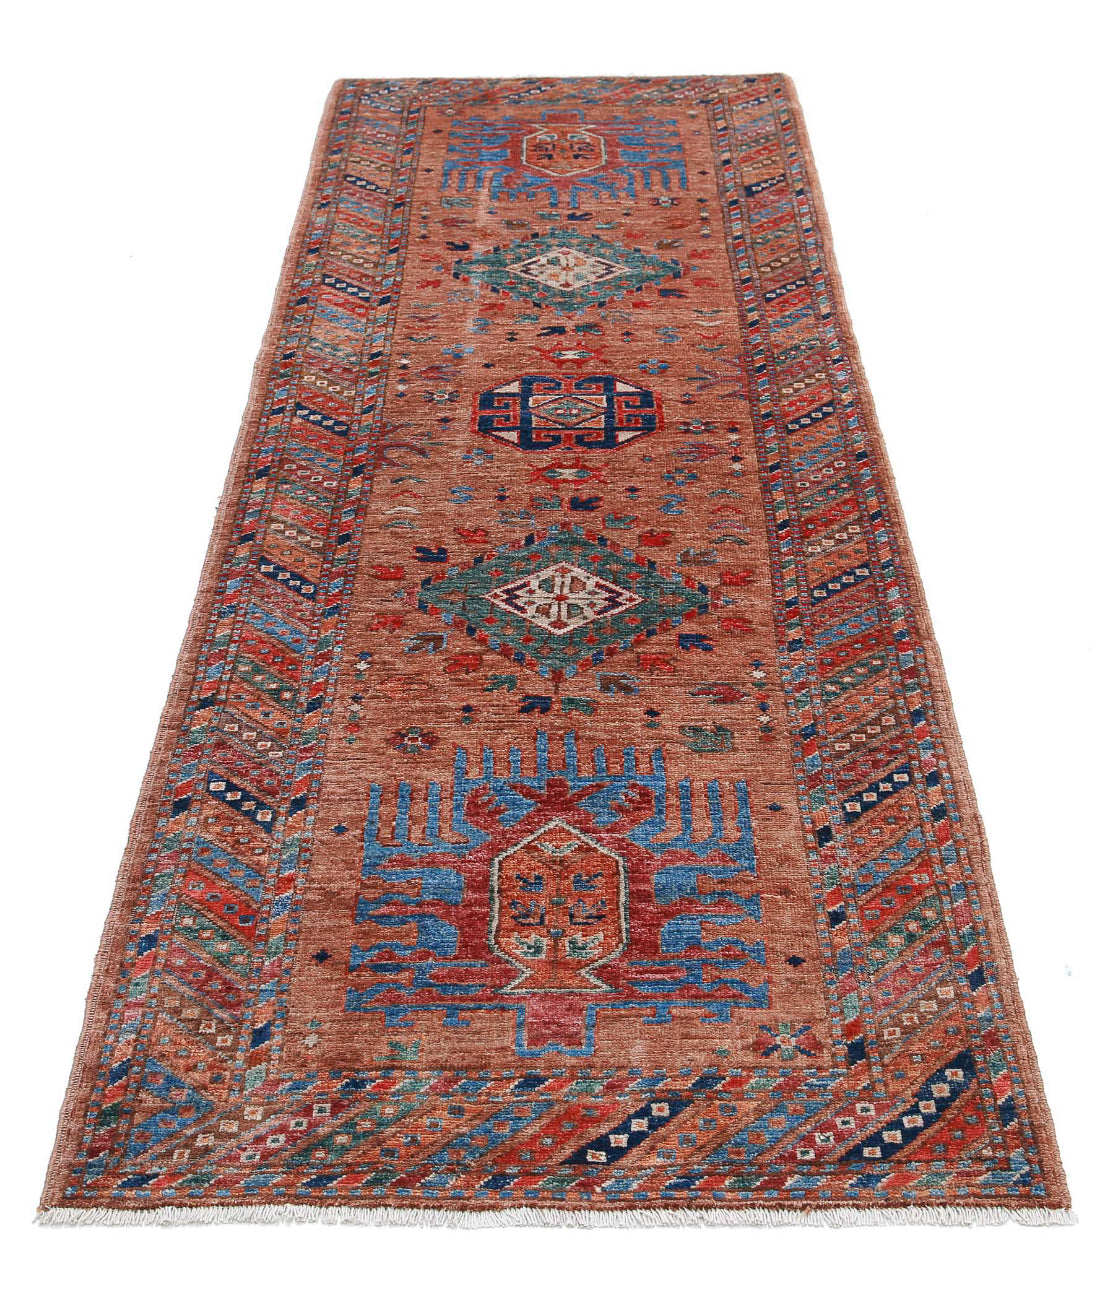 Hand Knotted Nomadic Caucasian Humna Wool Rug - 2'9'' x 8'0'' 2'9'' x 8'0'' (83 X 240) / Taupe / Multi